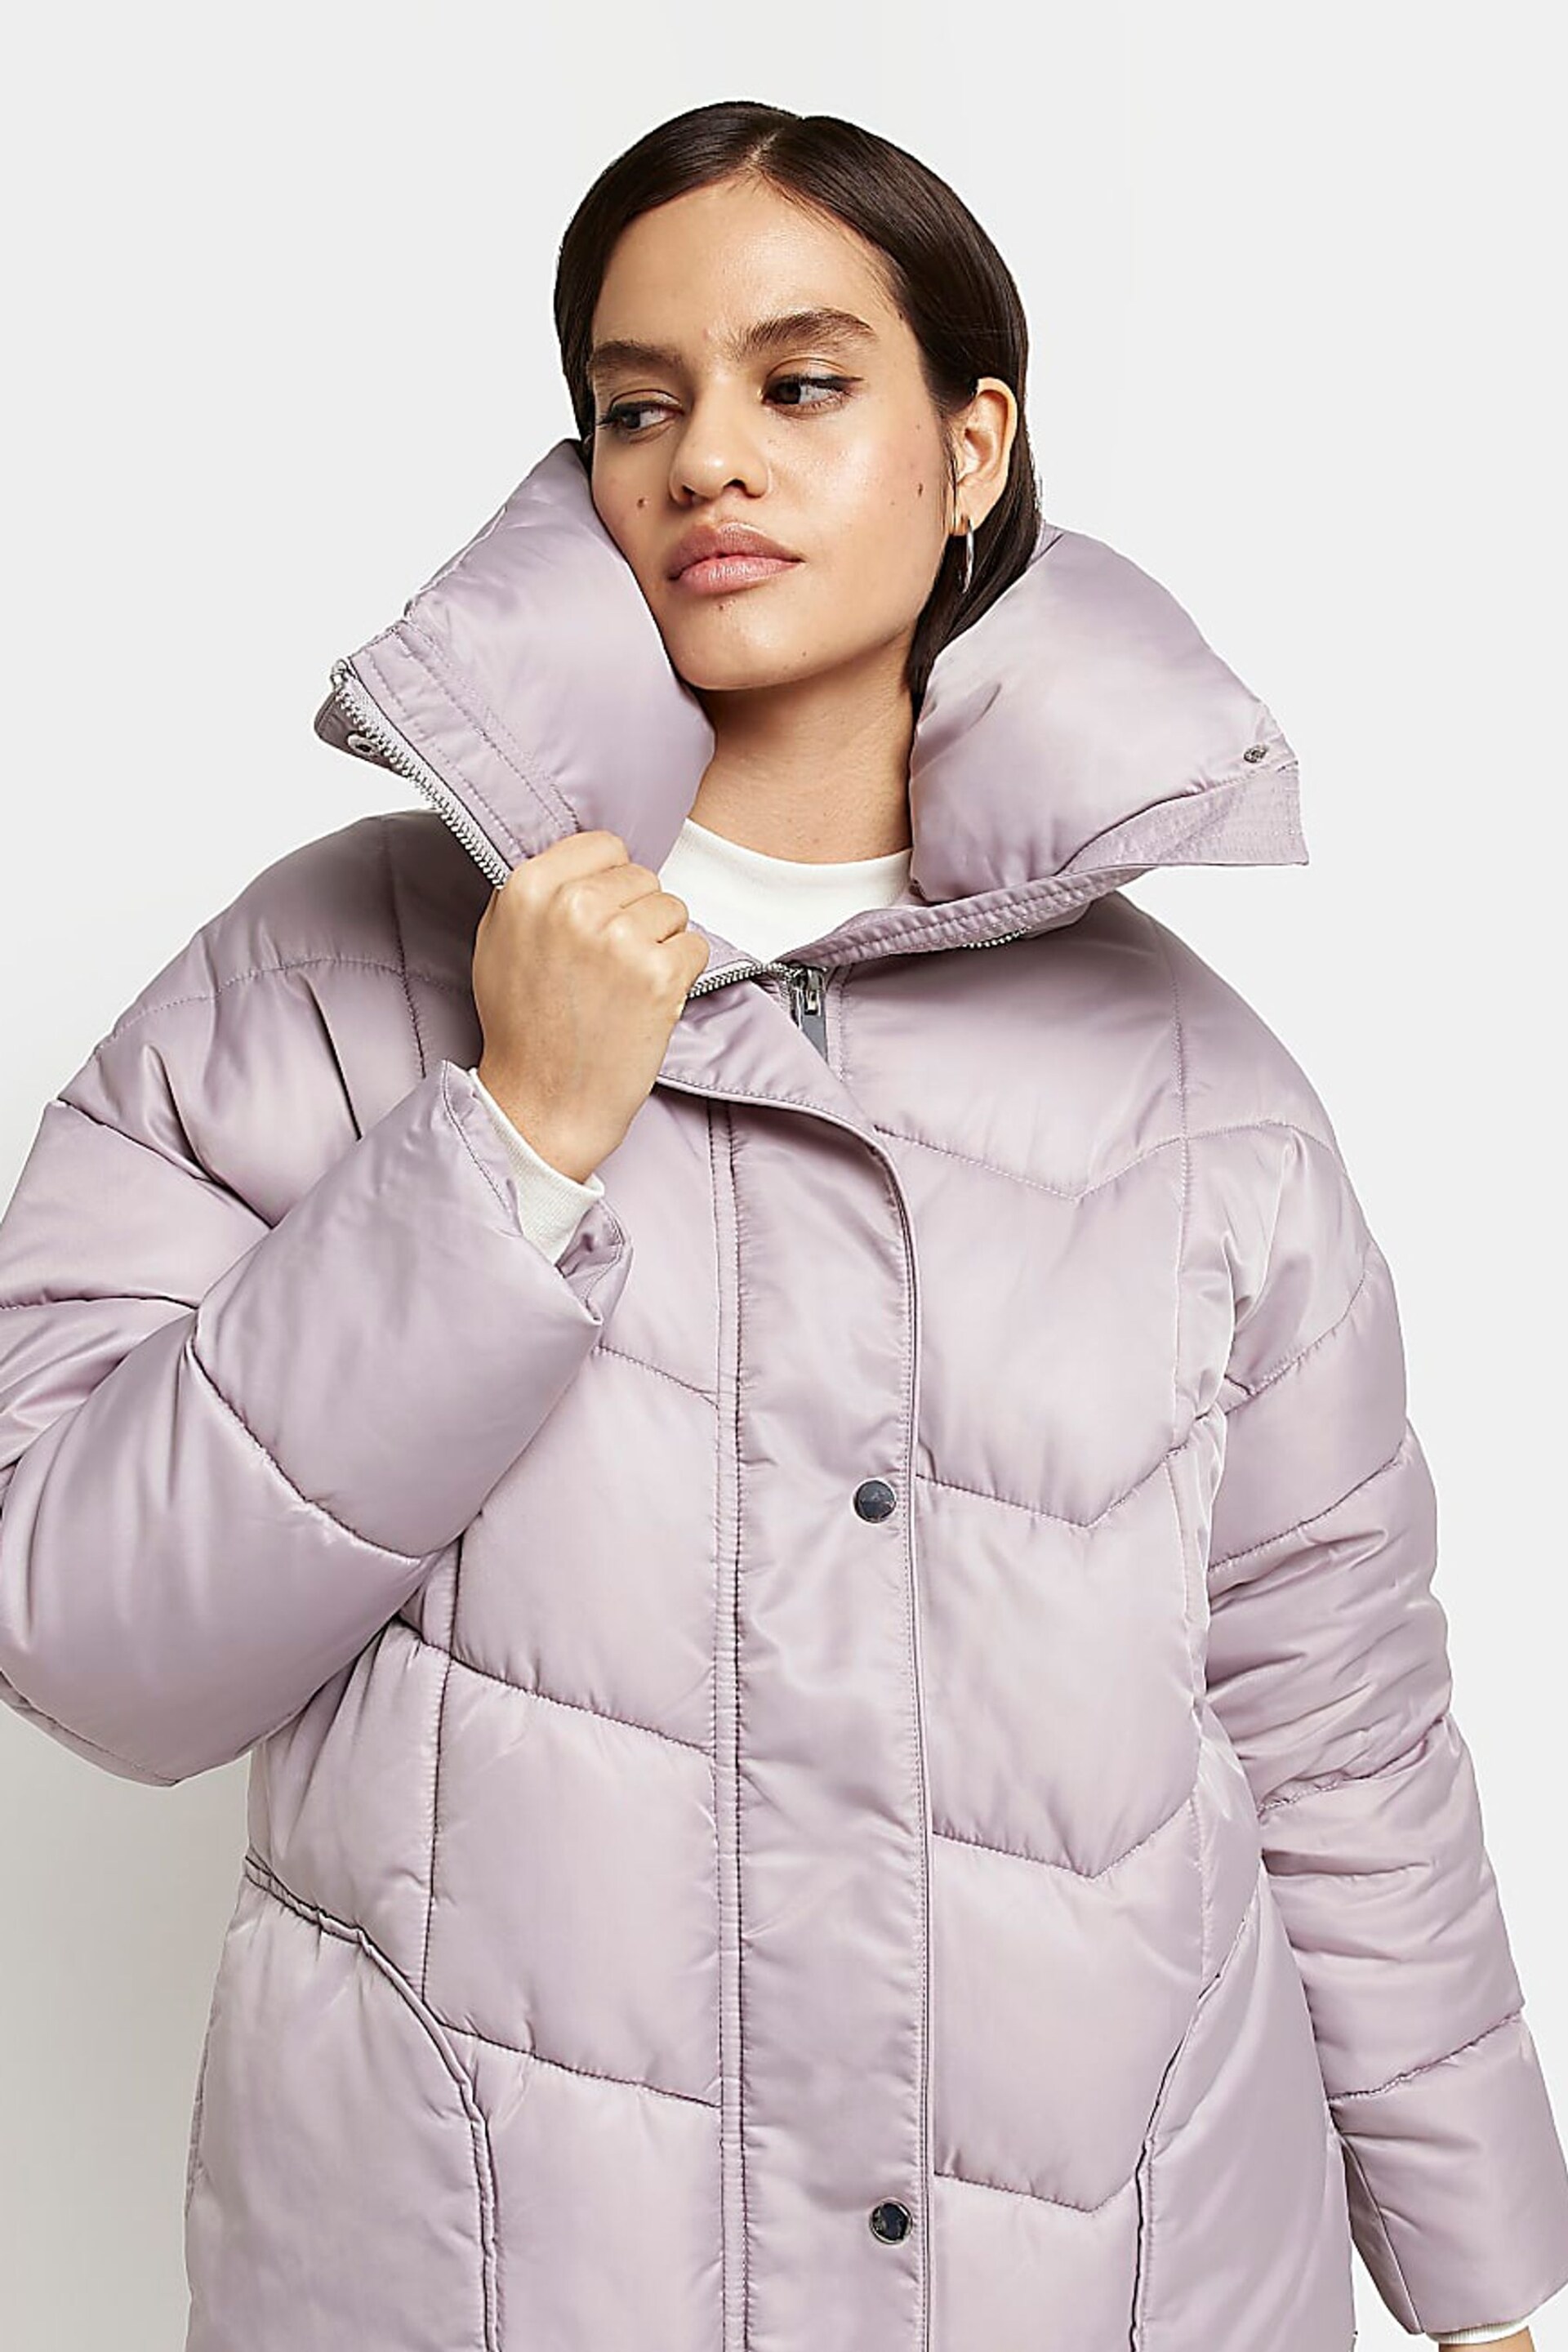 River Island Grey Panelled Puffer Jacket - Image 4 of 5